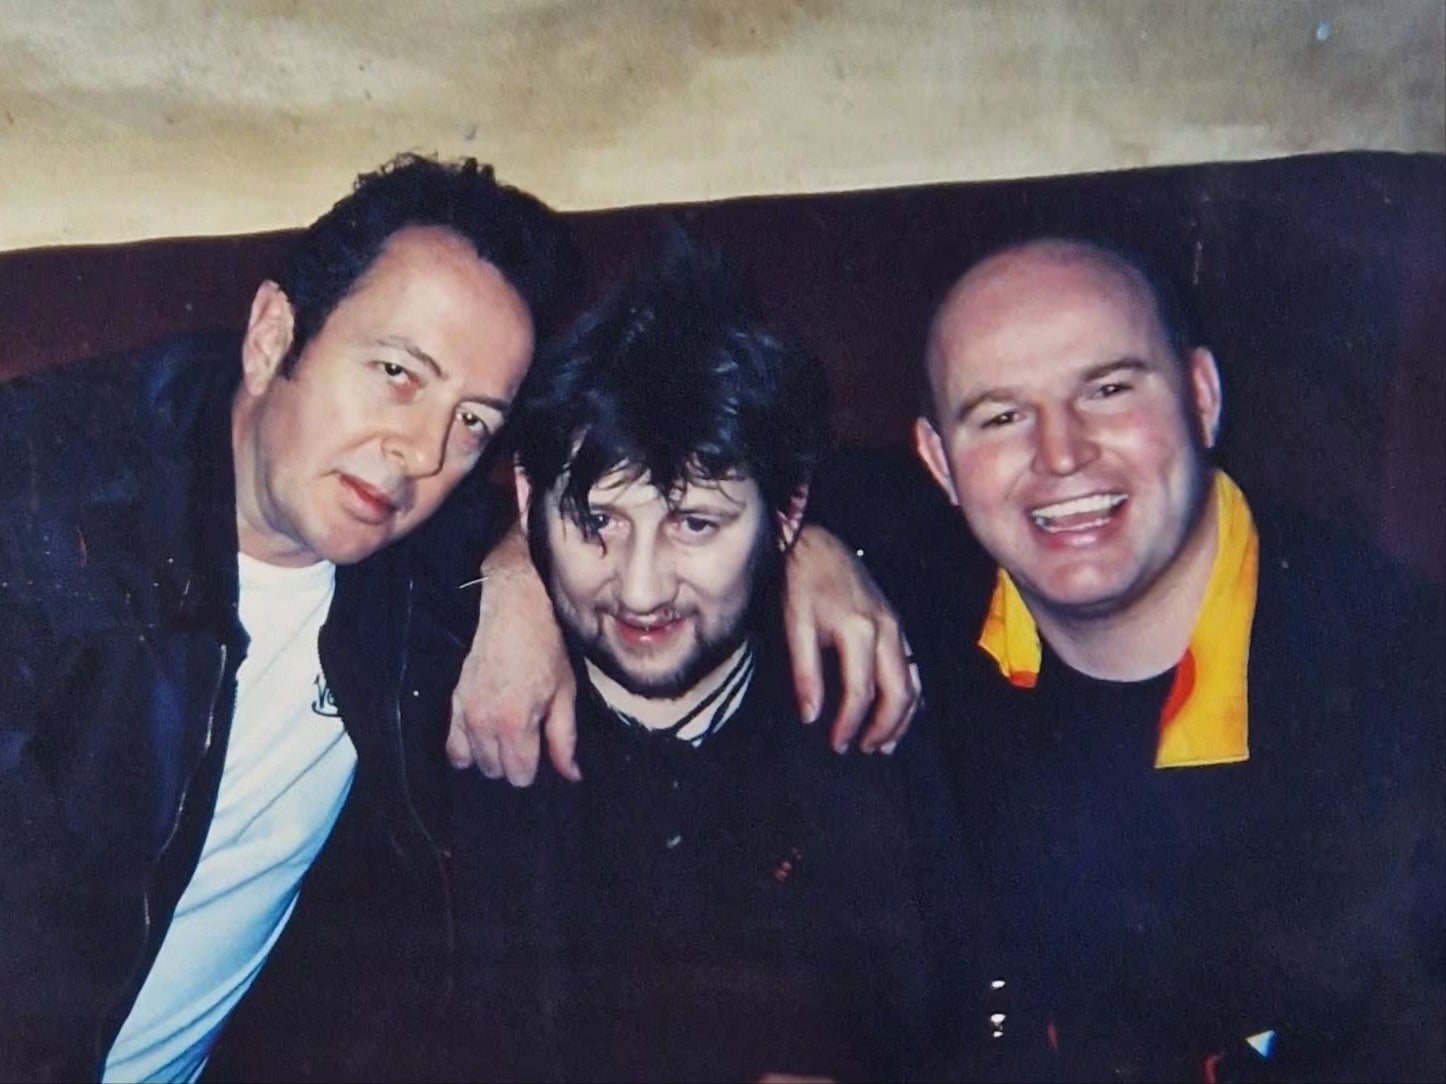 MacGowan with his former pub landlord Phillip Ryan and the late Joe Strummer